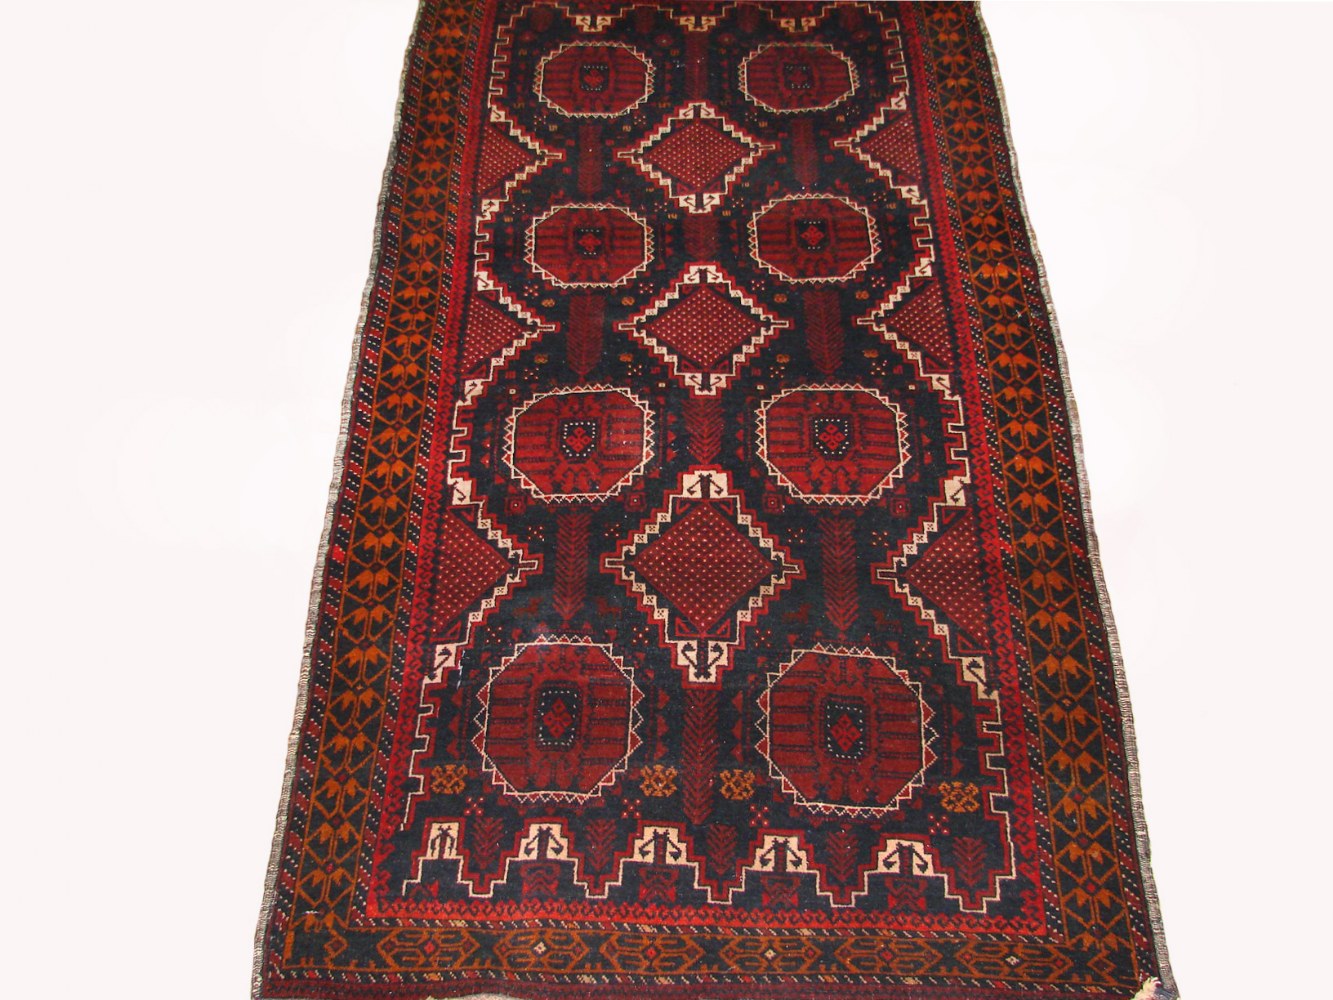 4x6 Kazak Hand Knotted Wool Area Rug - MR19455